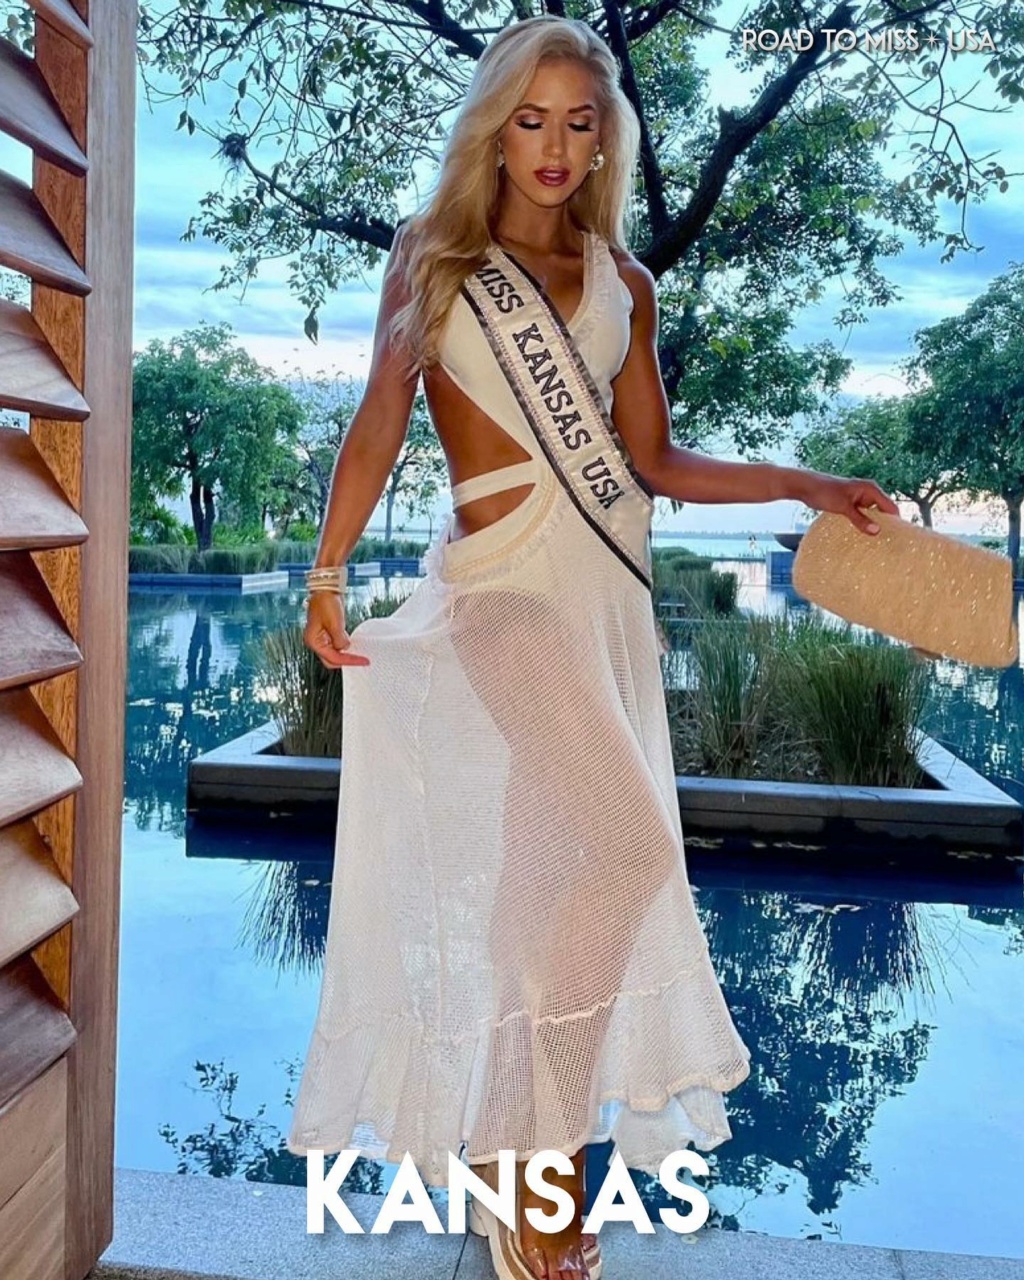 ROAD TO MISS USA 2021 is KENTUCKY! - Page 3 24223312